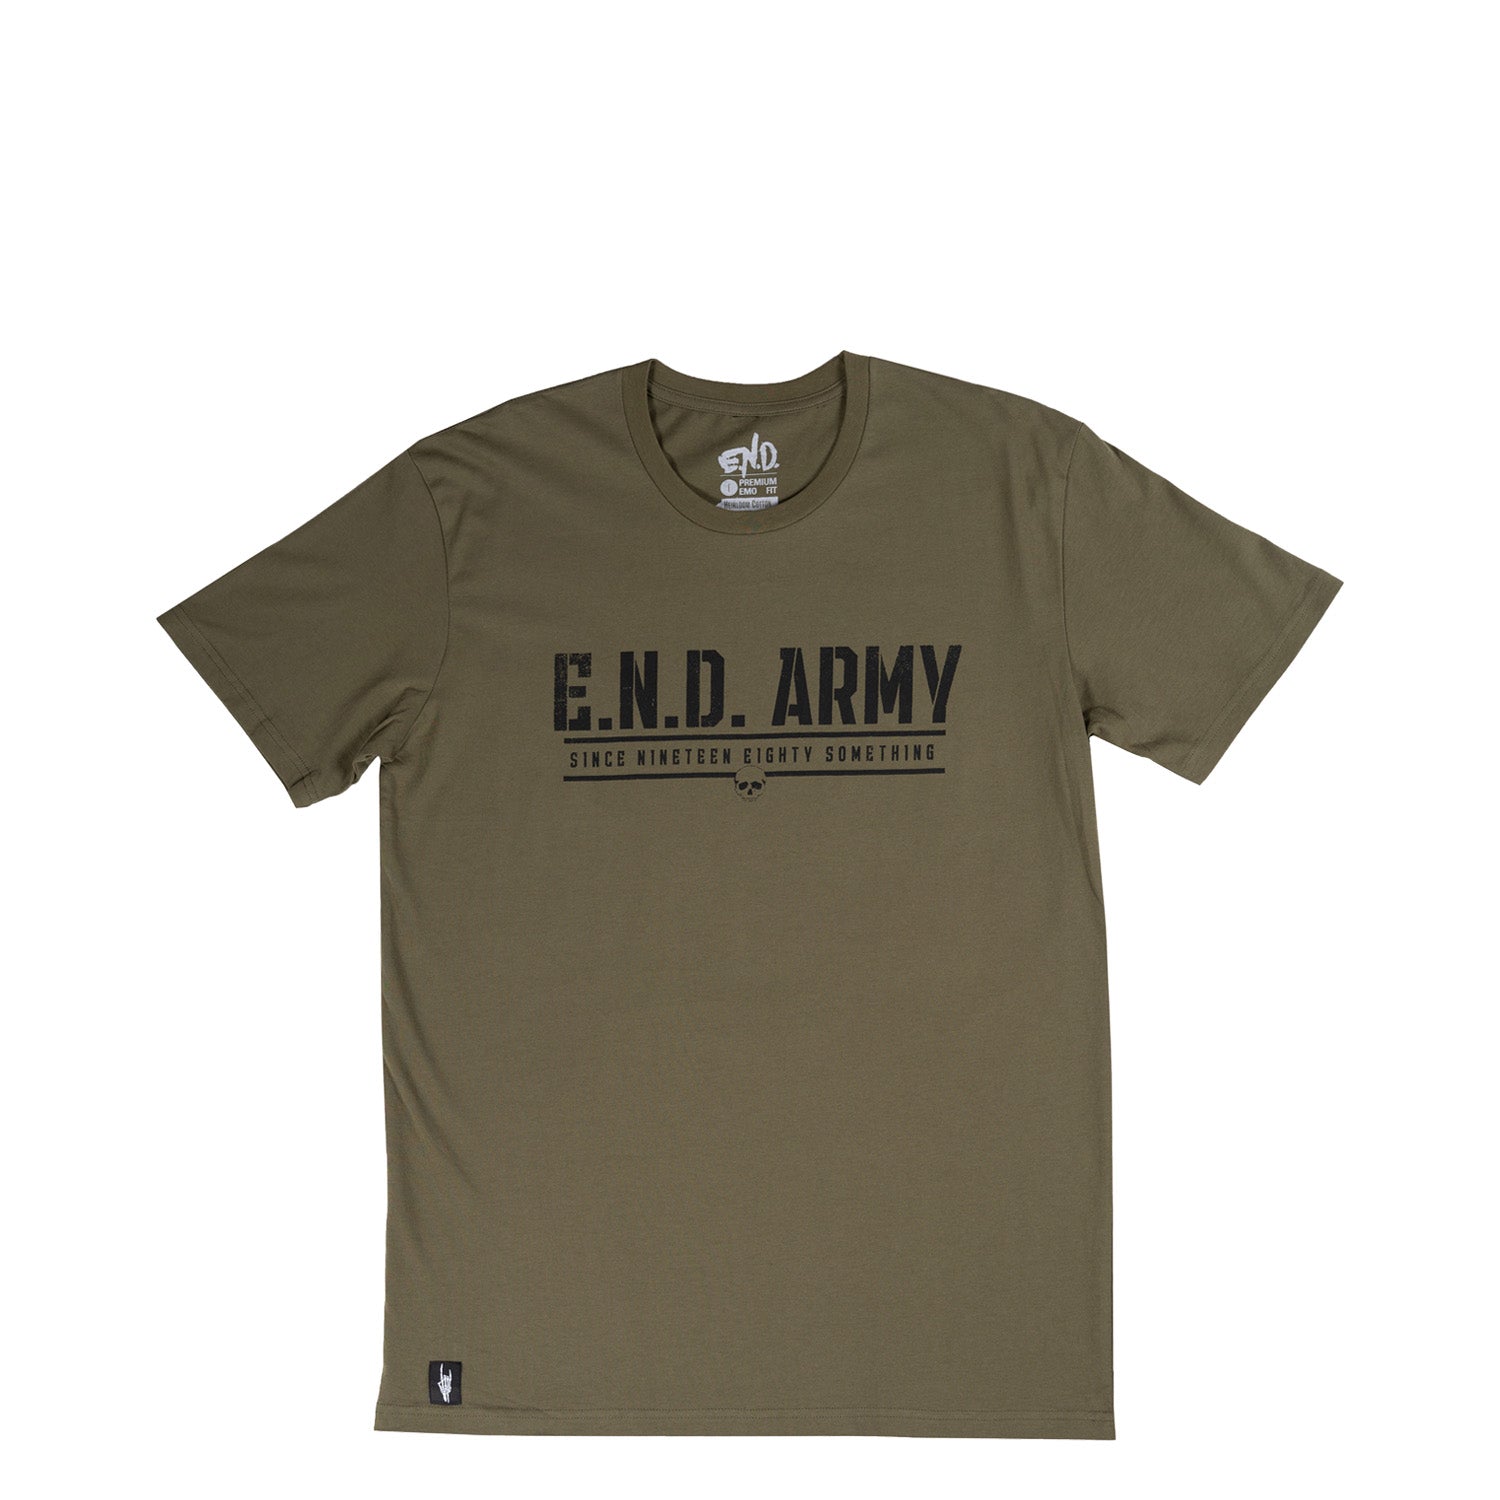 Emo’s Not Dead, END Army Tee , Band Merch, vintage t shirt